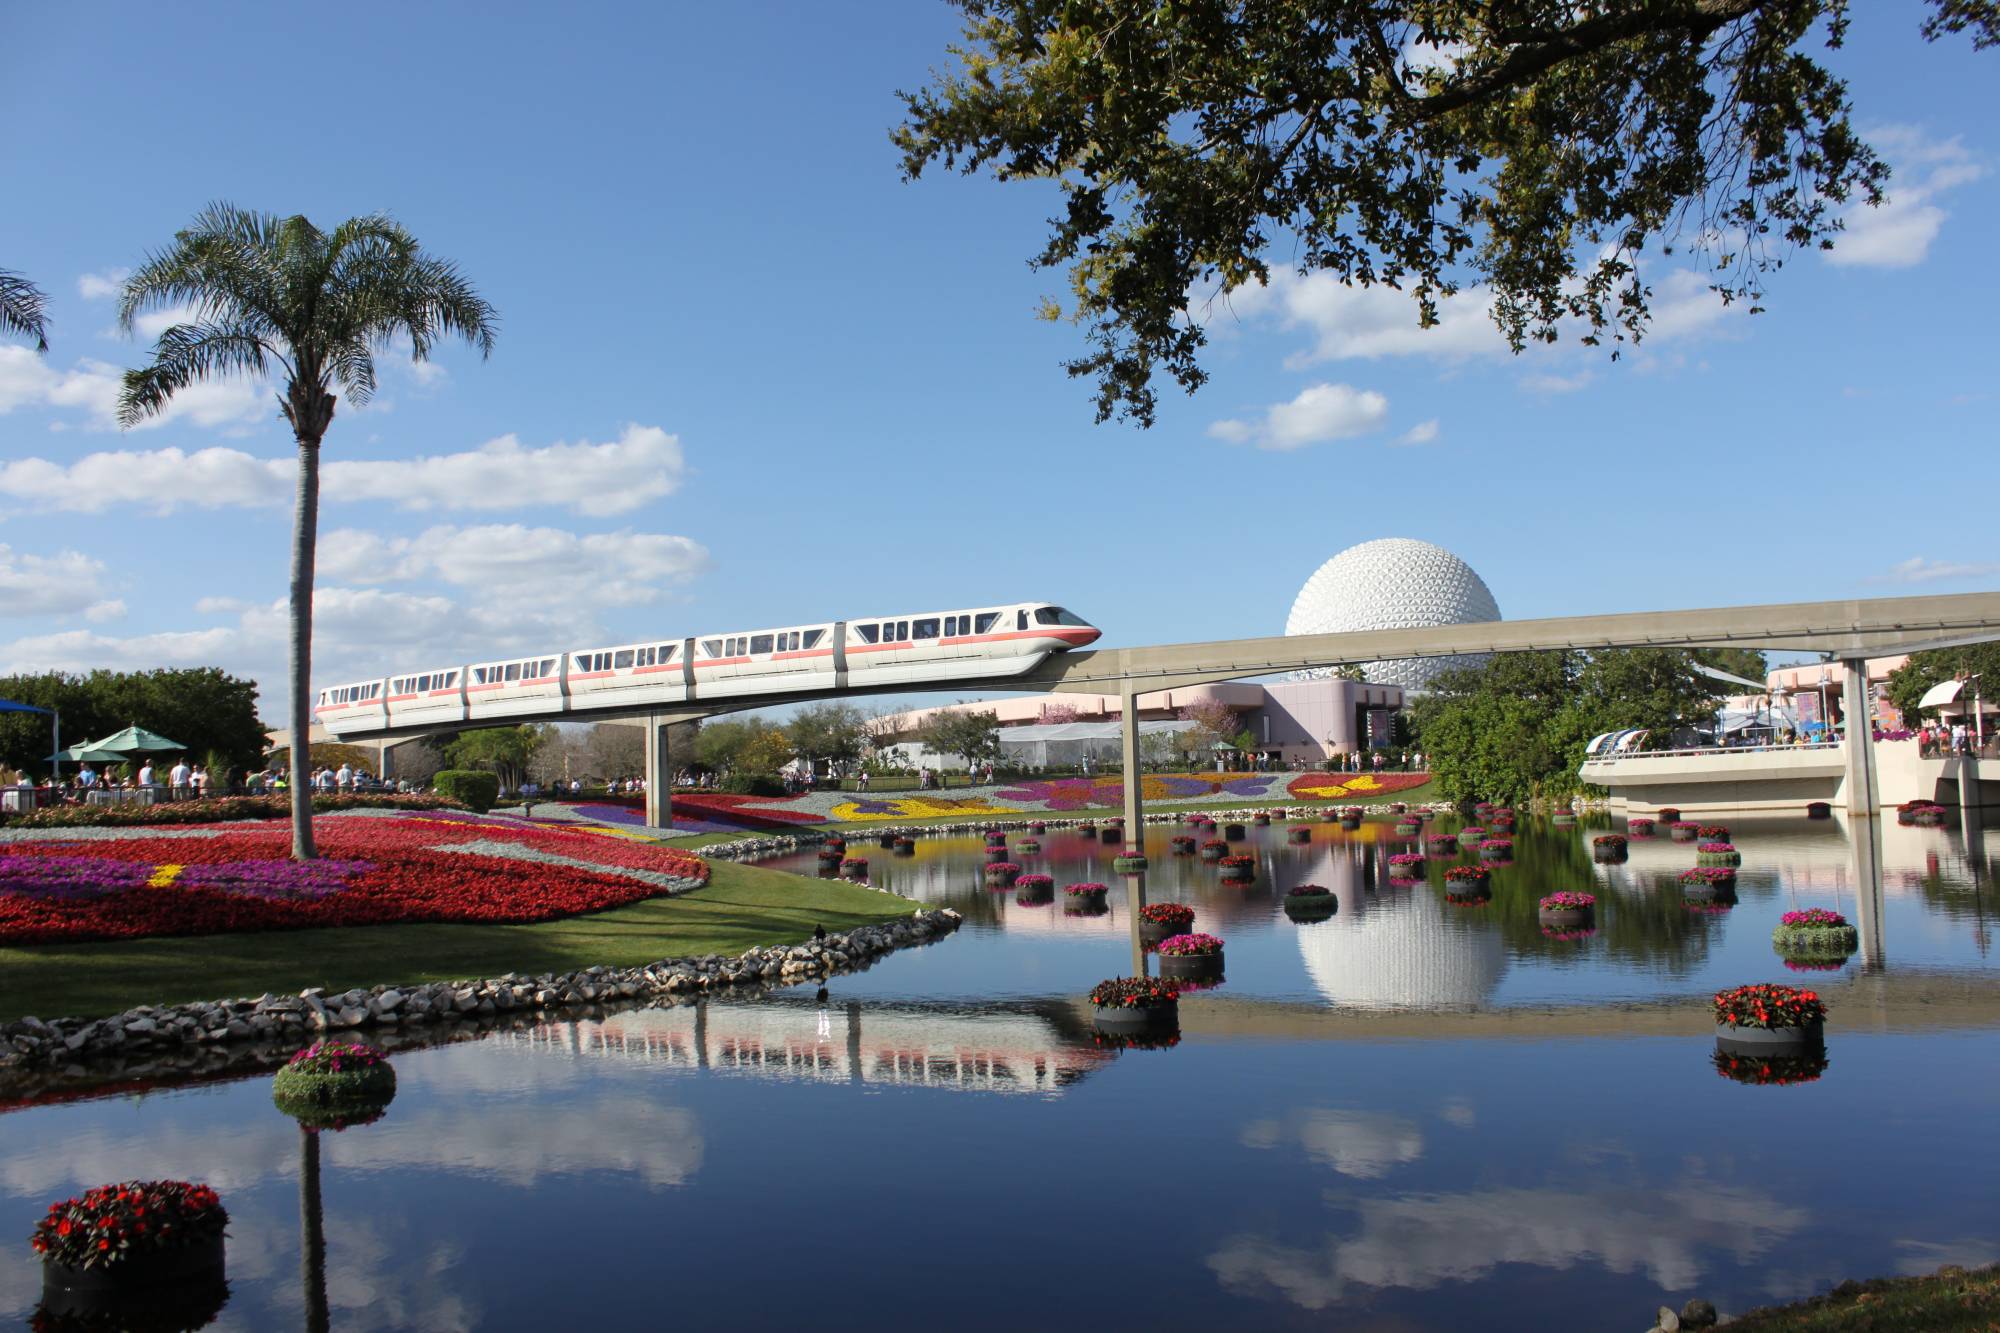 Learn what goes on at Walt Disney World throughout the year |PassPorter.com